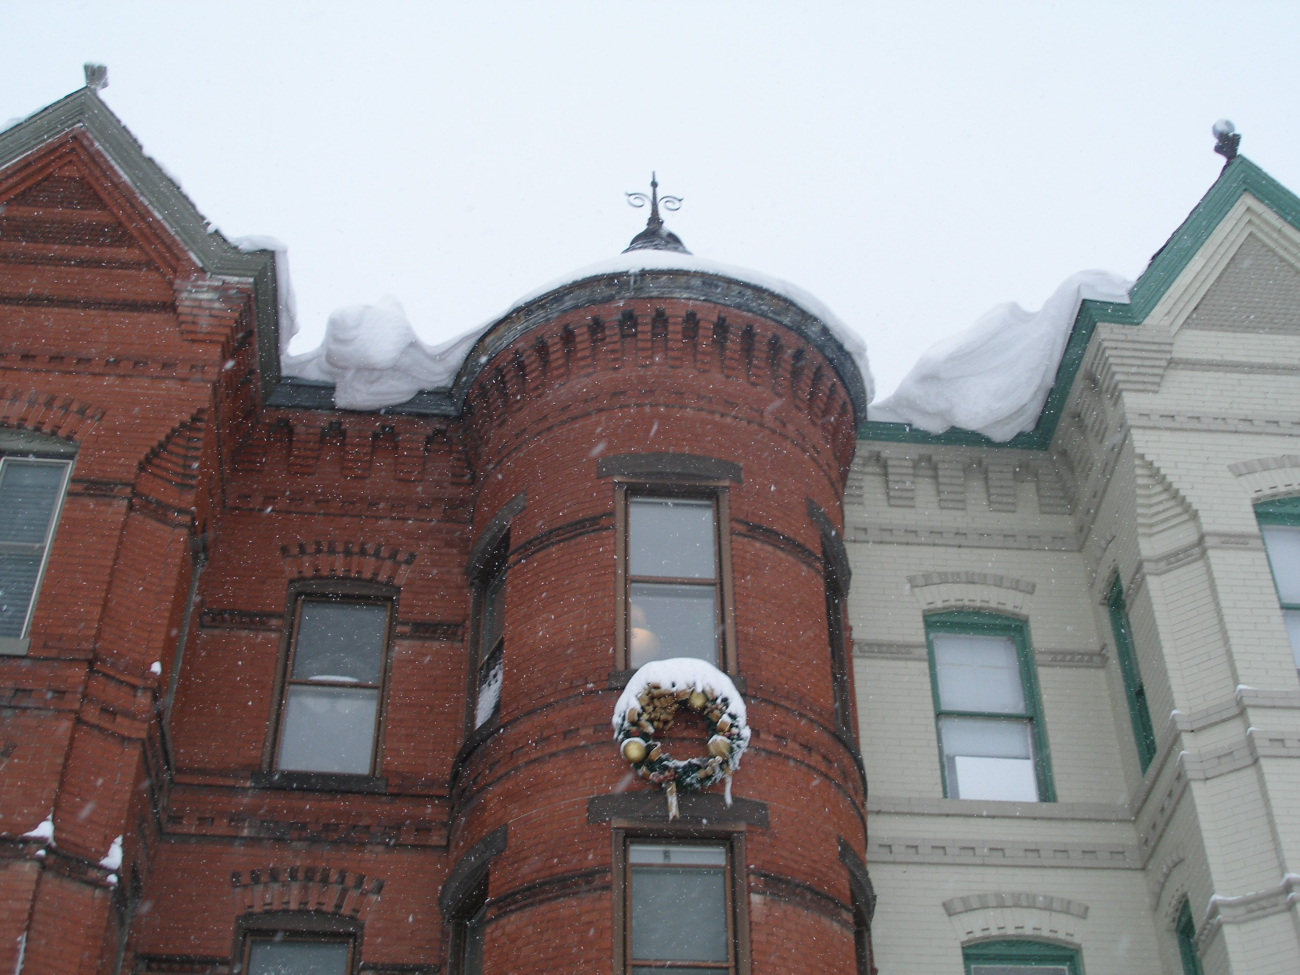 Overhanging snow from roofs of row houses following second major snowstormof 2009/2010 season